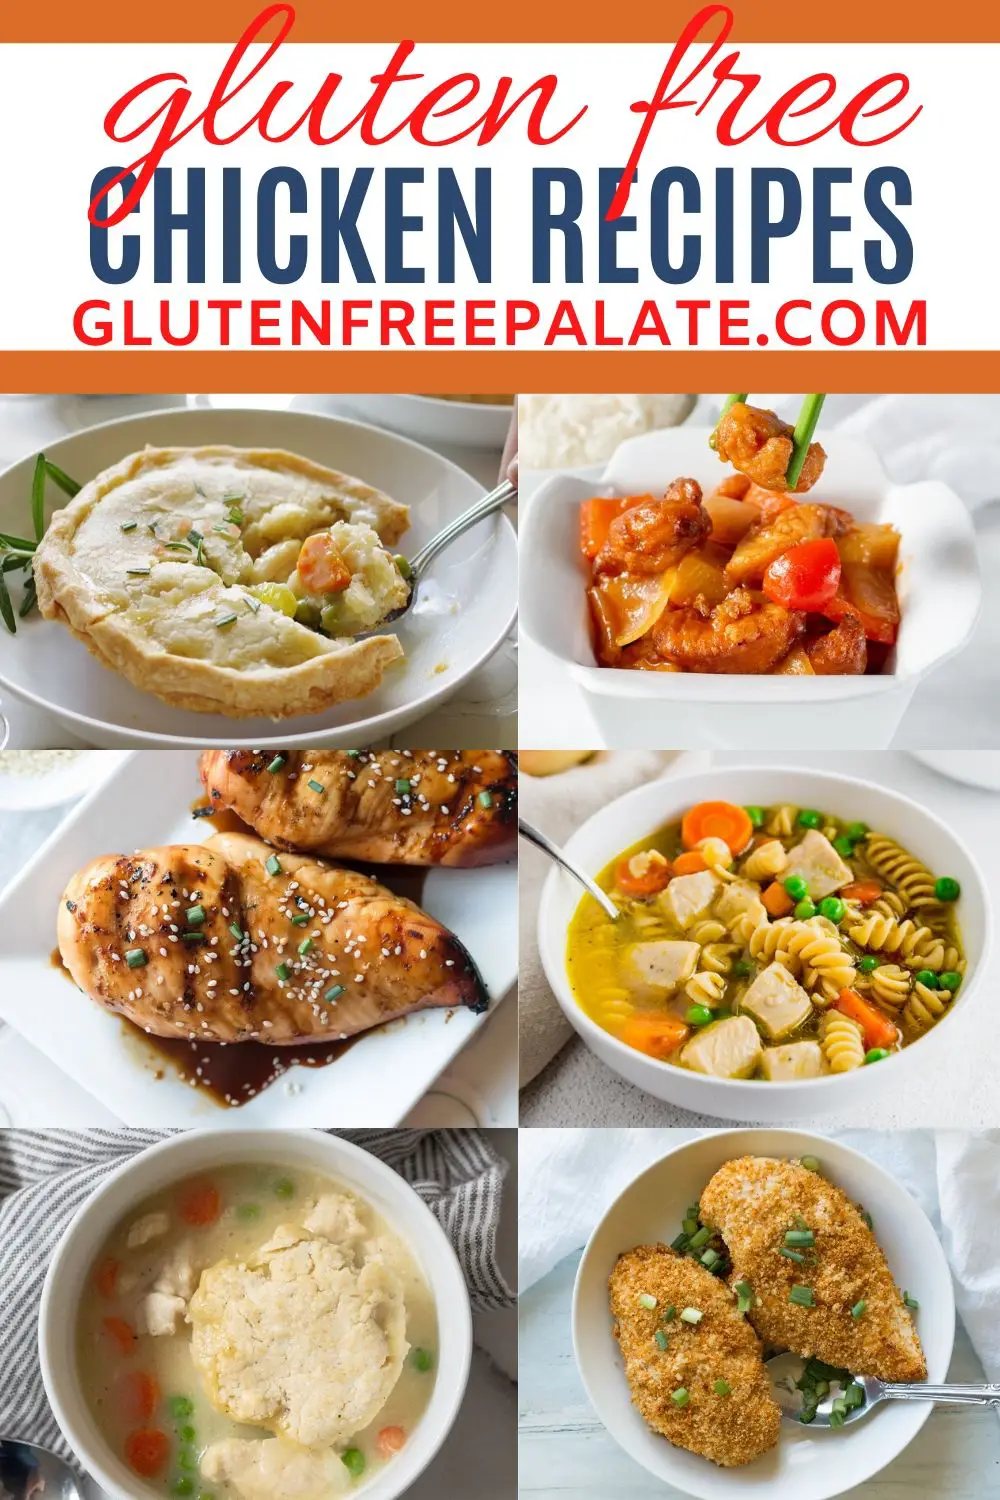 a pinterest pin collage of photos of gluten-free chicken recipes